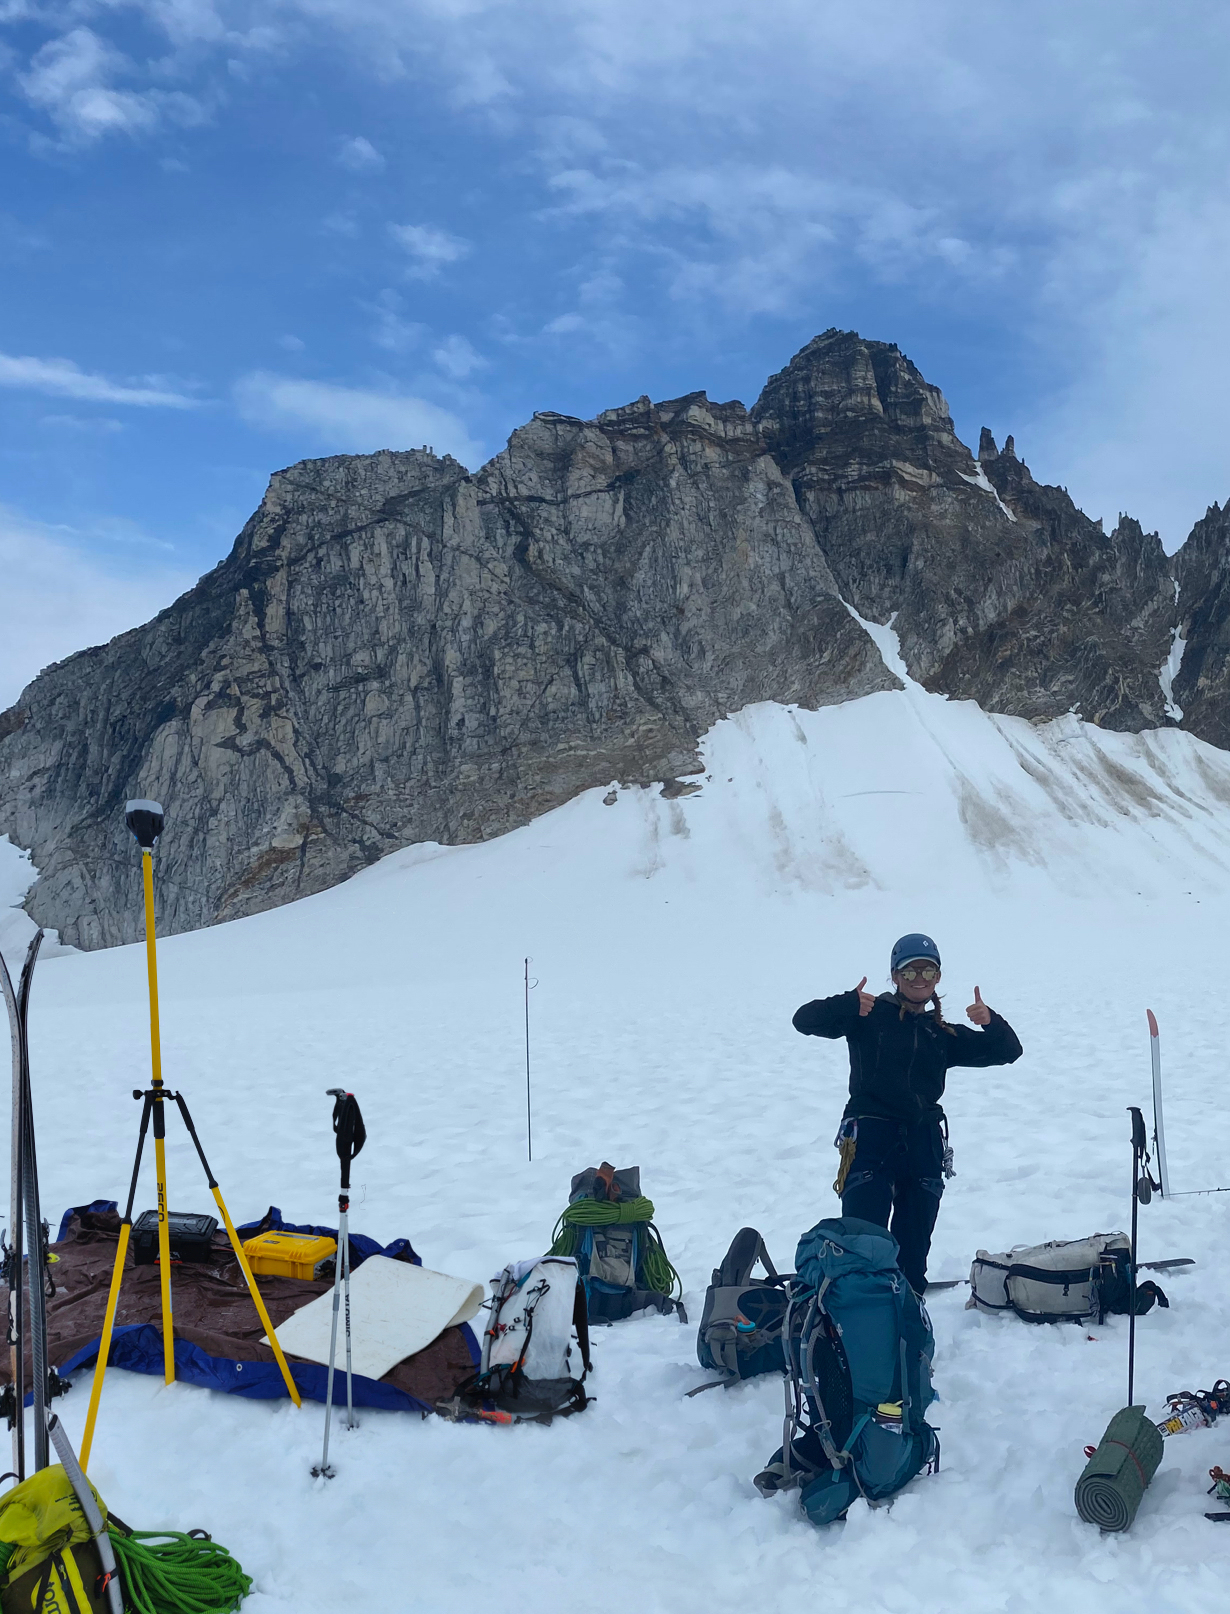 RESESS Satellite Intern Michela Savignano gives two thumbs up as she is surrounded by GPS equipment the Juneau Icefield Research Program in 2021. Snow covers the ground and there is a large outcrop behind her.